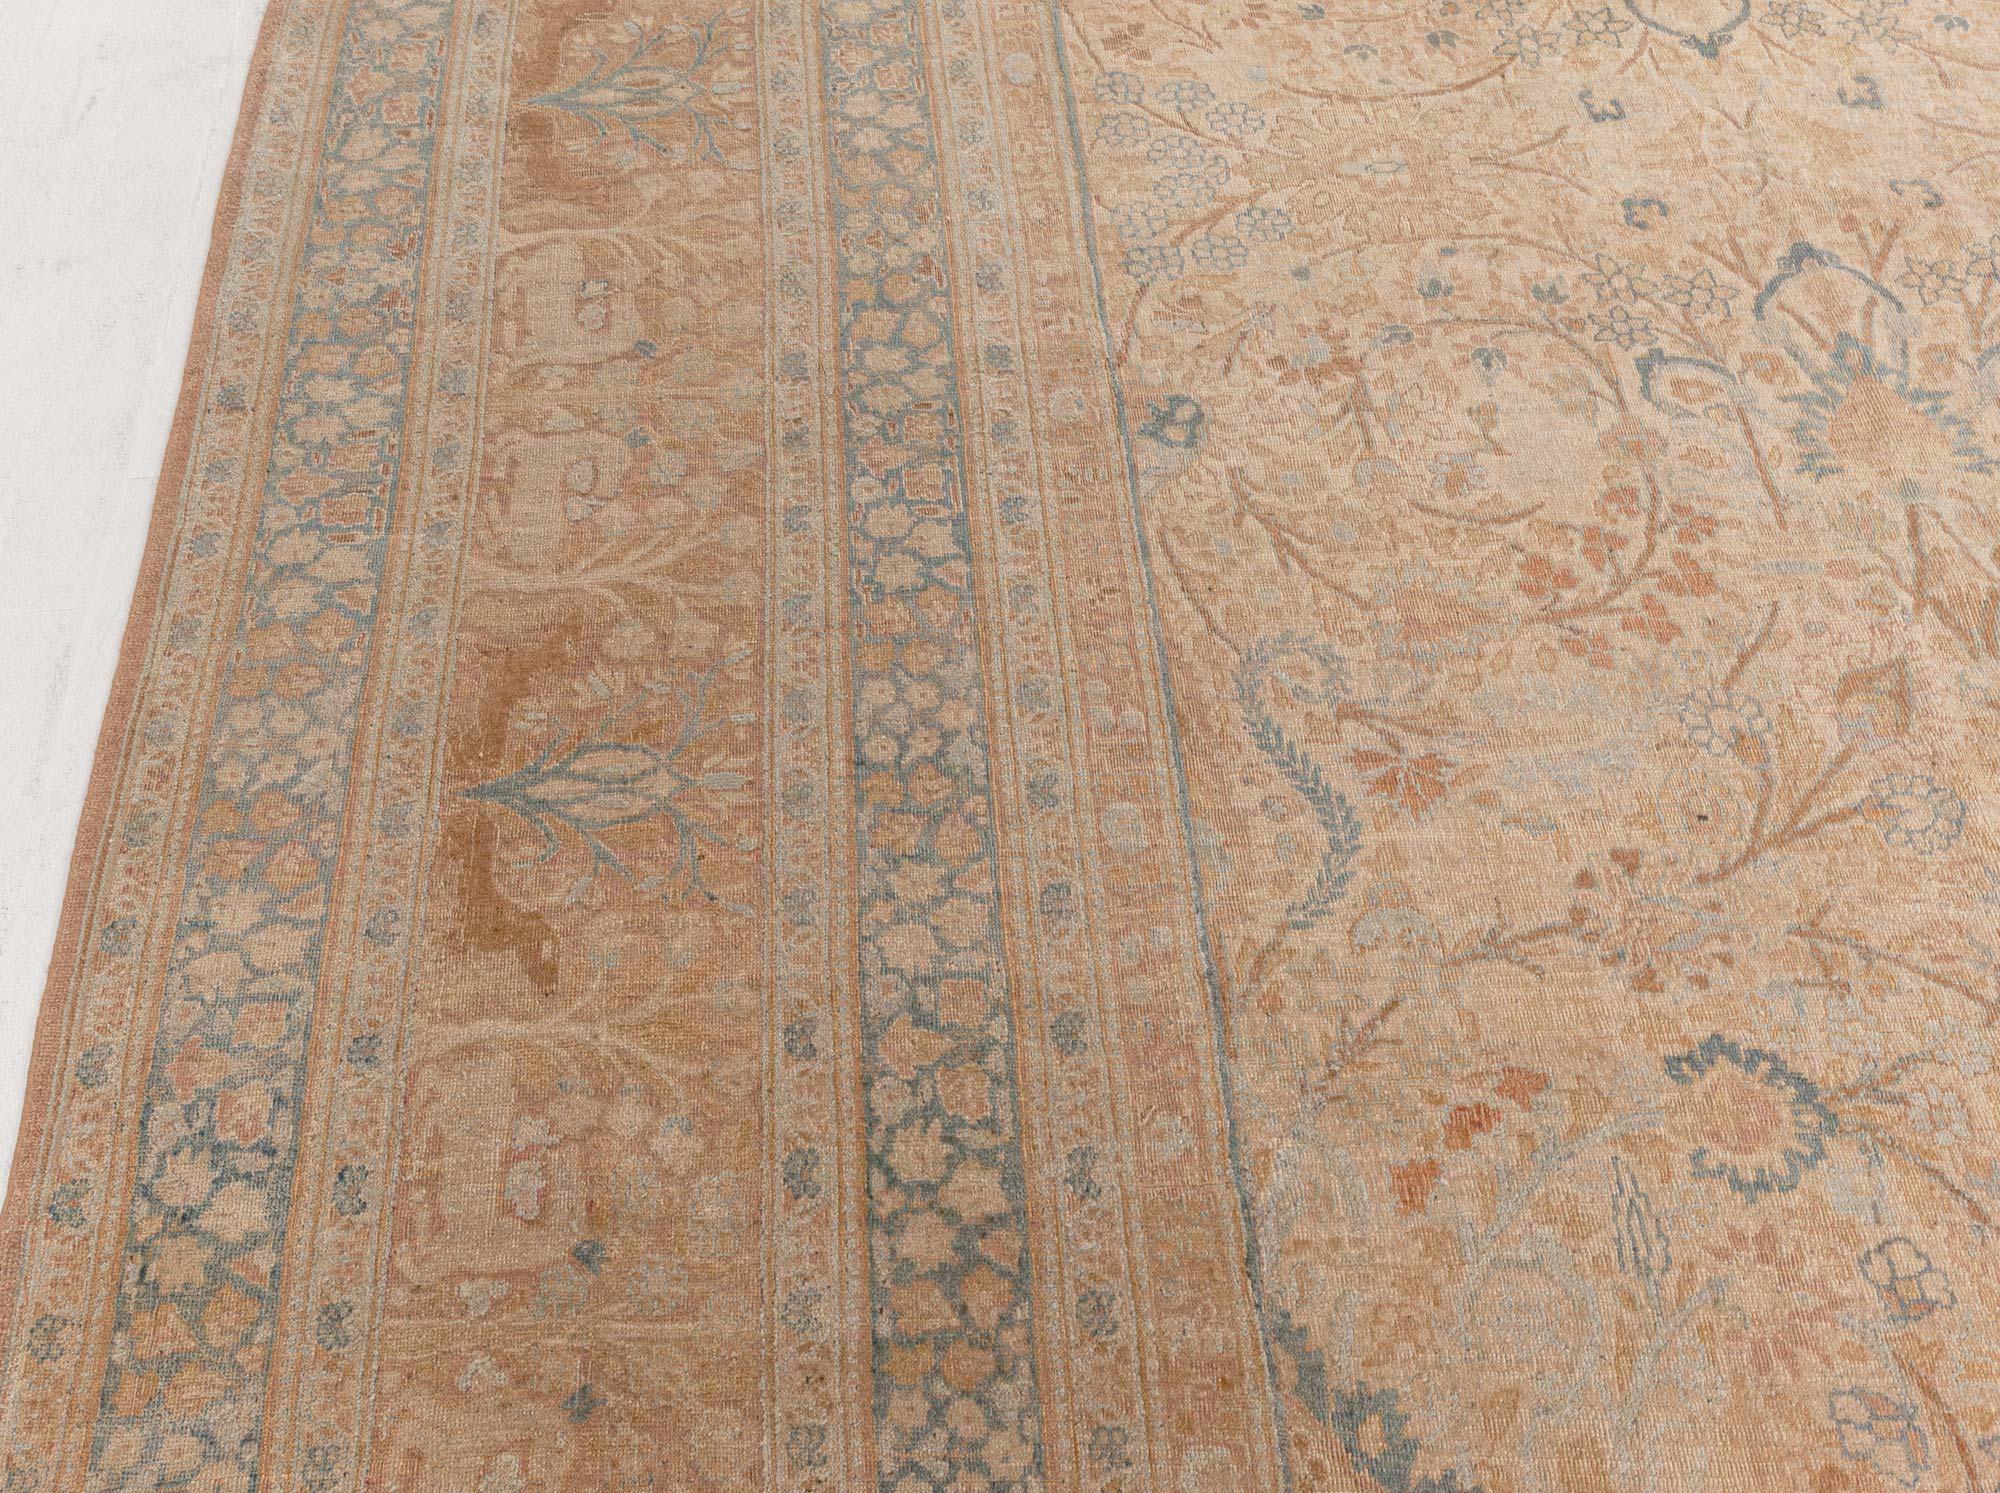 Antique Persian Meshad Animal Hand Knotted Wool Carpet
Size: 12'5